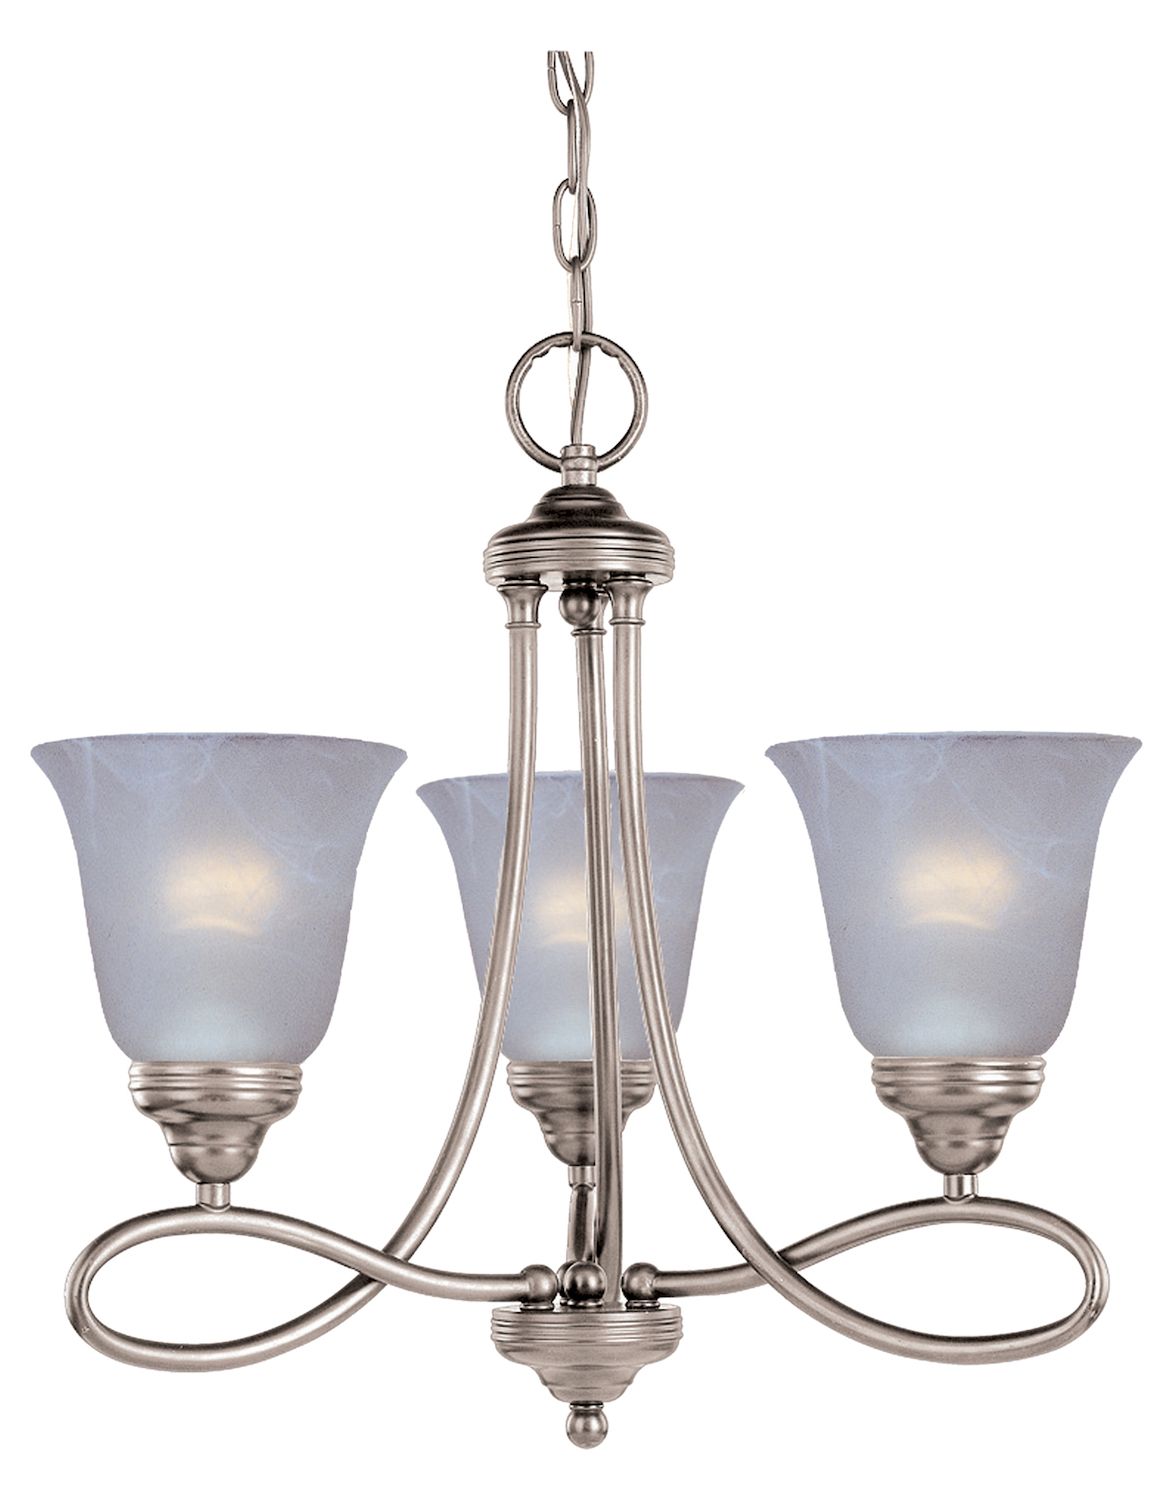 2020 Maxim Three Light Satin Nickel Marble Glass Up Mini In Satin Nickel Crystal Chandeliers (View 13 of 20)